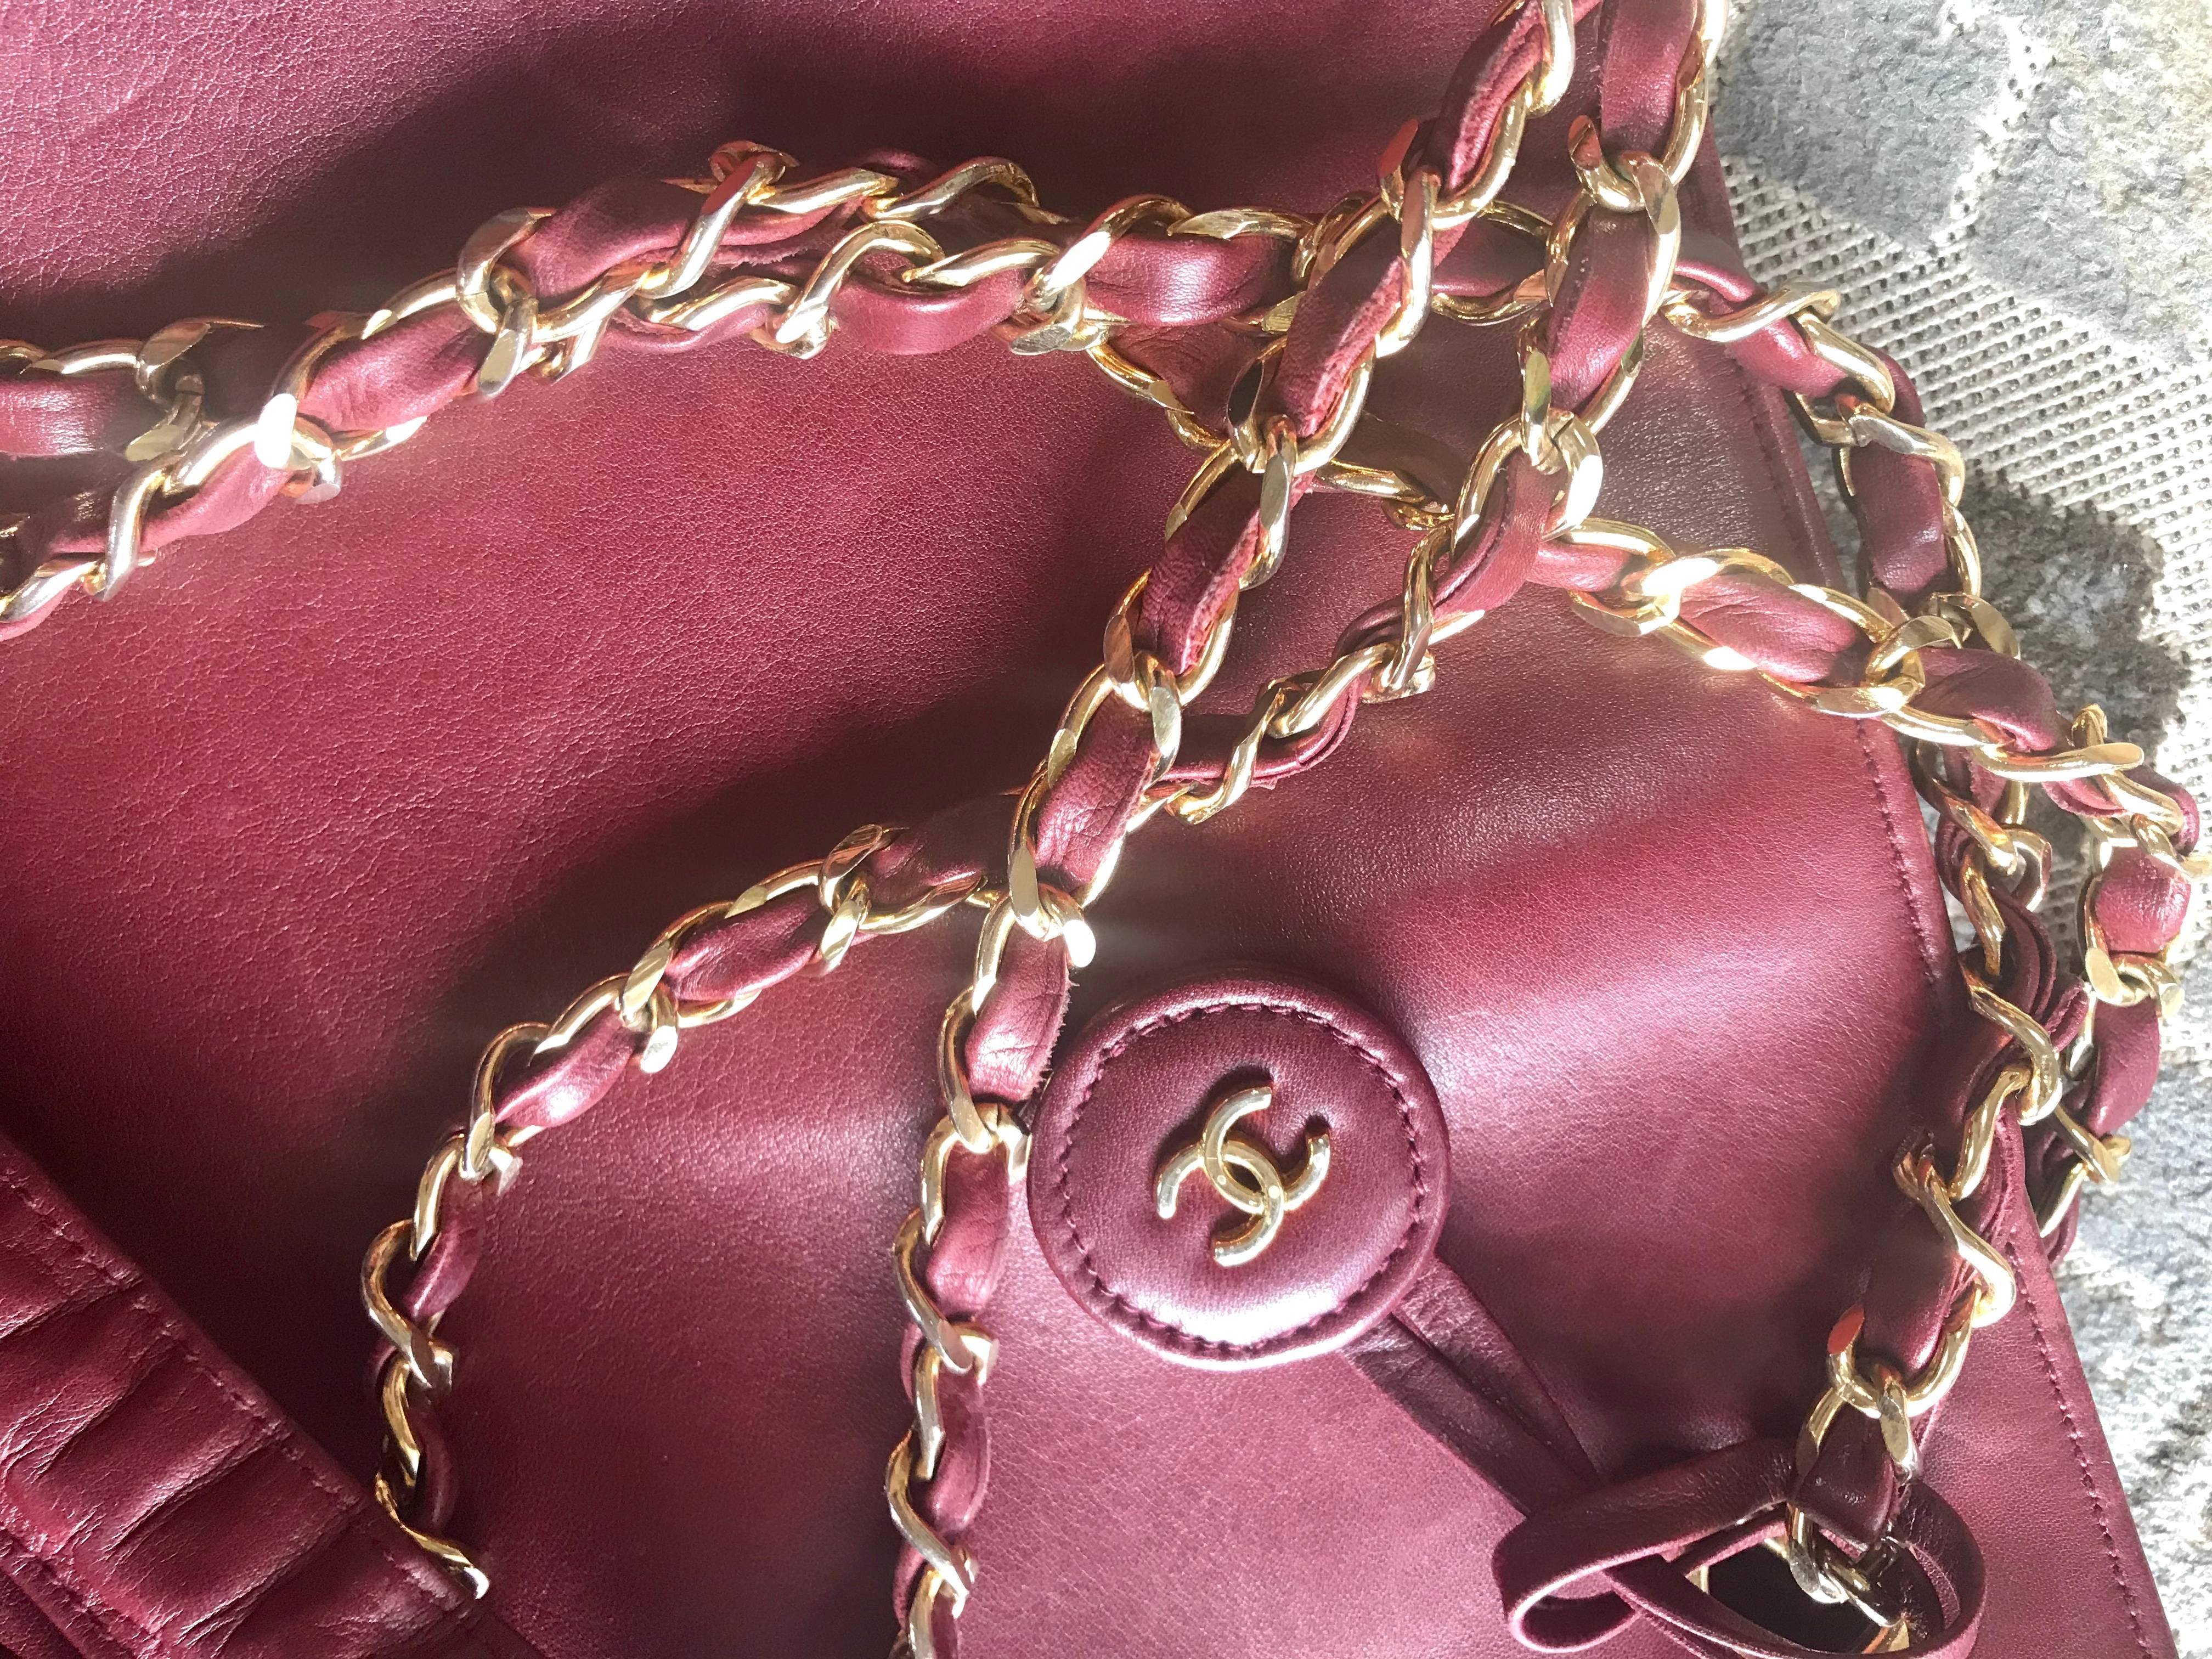 Chanel Vintage wine leather tote bag with gold chain handles and CC motif charm For Sale 3